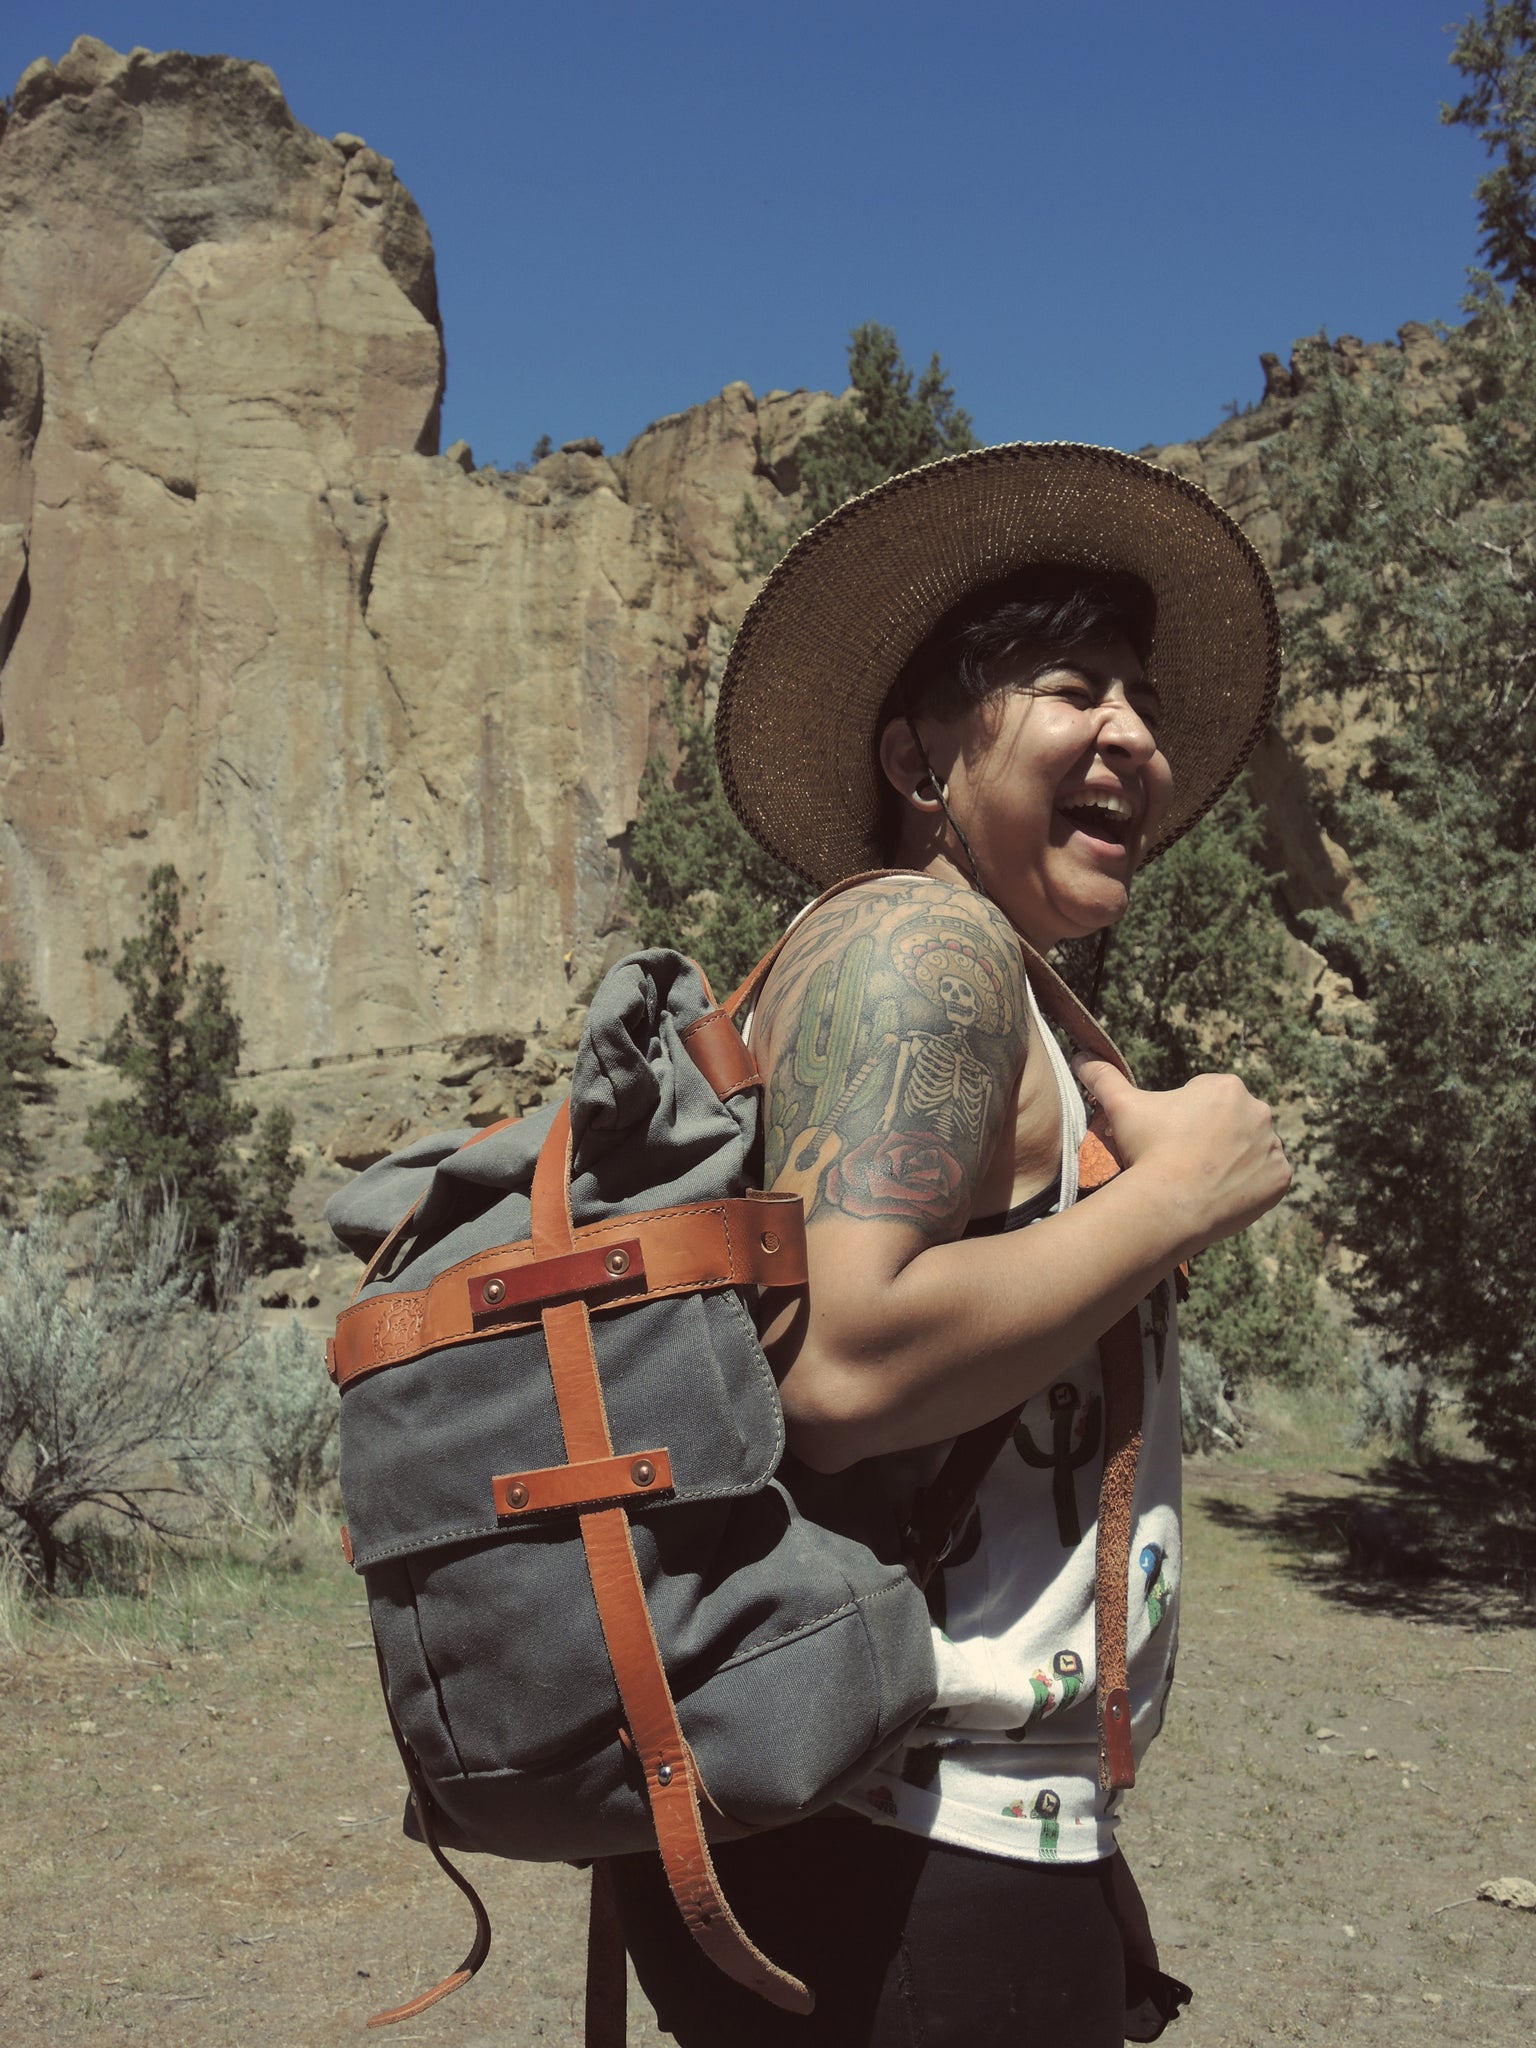 Parva Rucksack at Smith Rock. Hand crafted high quality leather goods in nature!